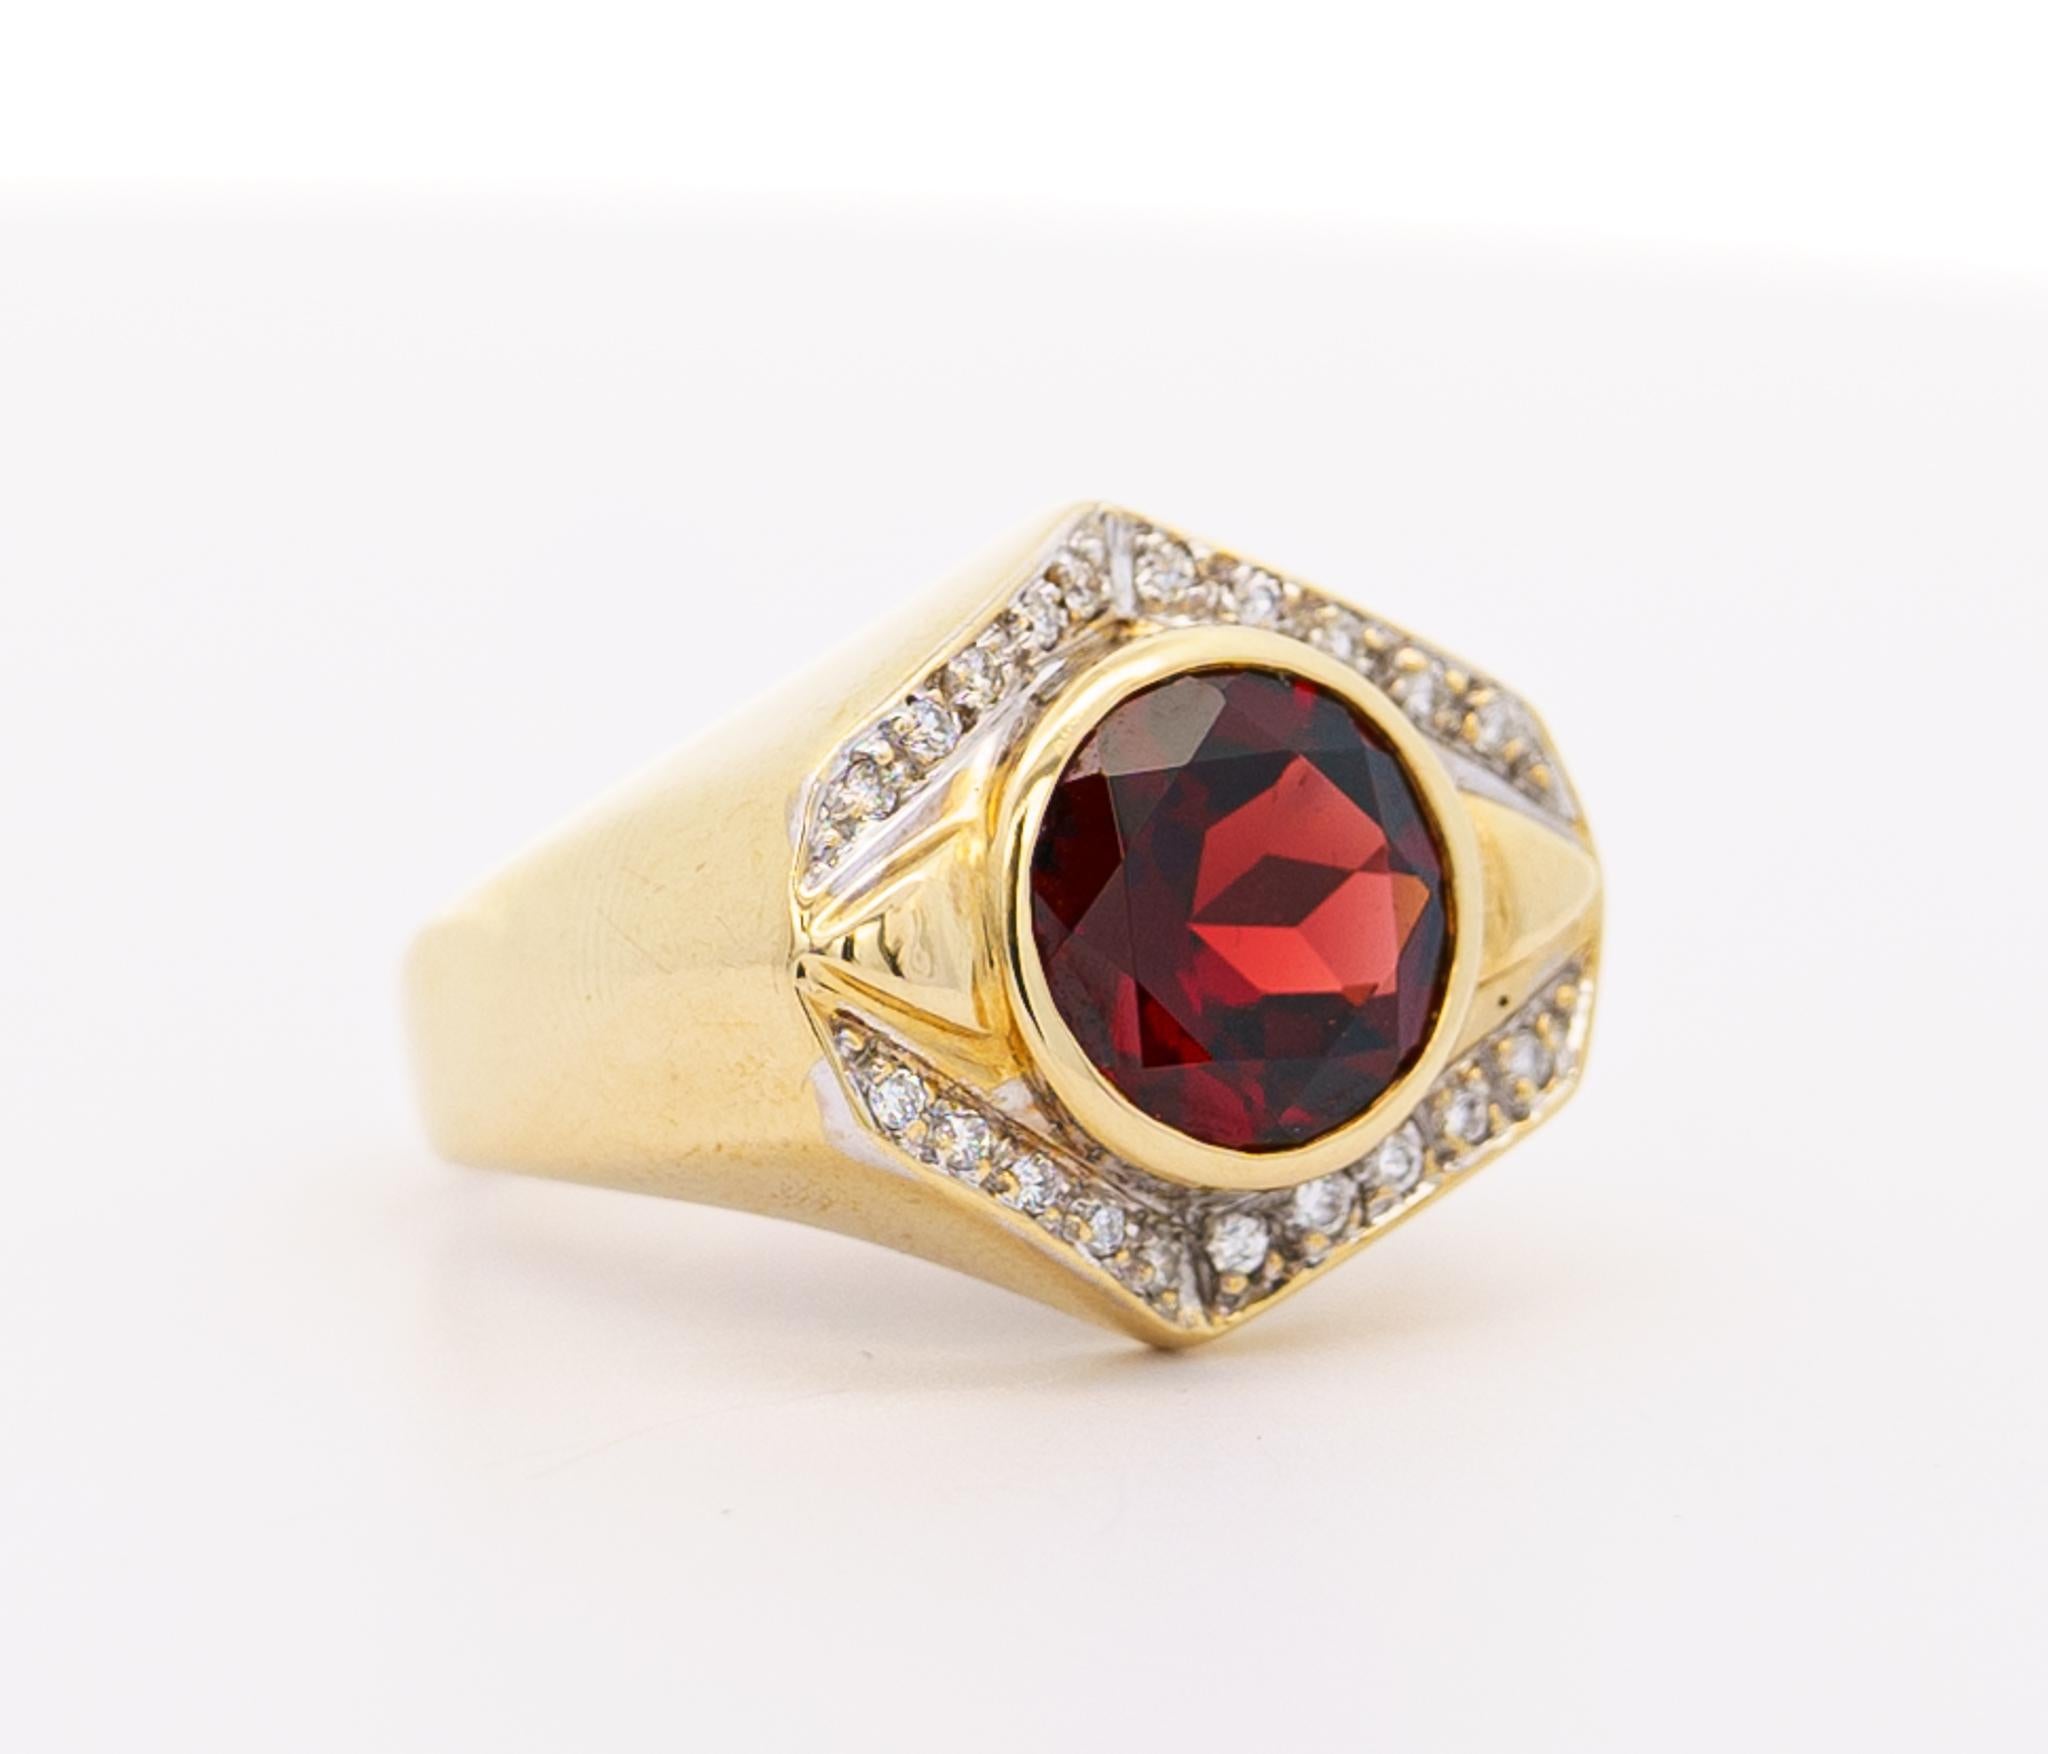 Unique men's ring with an exceptionally beautiful and GIA certified Pyrope-Almandine Garnet, with deep darkish red and violet hues. Pyrope-Almandine Garnets are one of the most heavily sought-after varieties of Garnet, being used since the late 18th